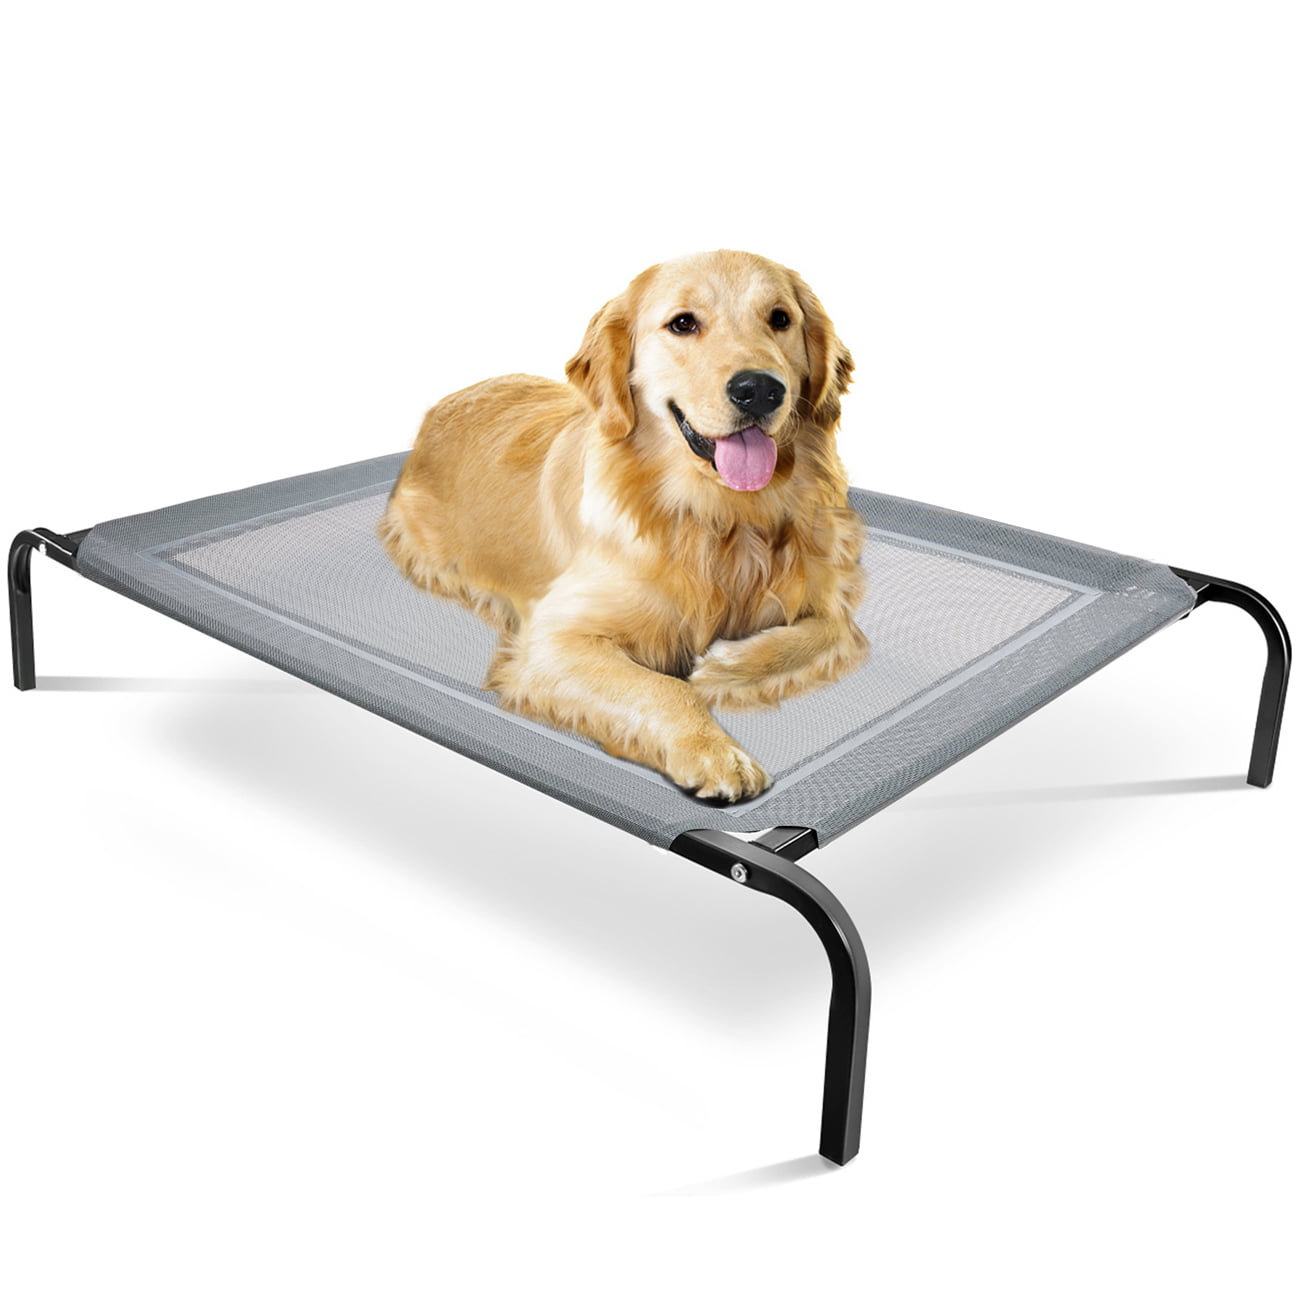 Paws and Pals Dog Bed Elevated High Quality Camping for Dogs Cats (Gray) (MM)